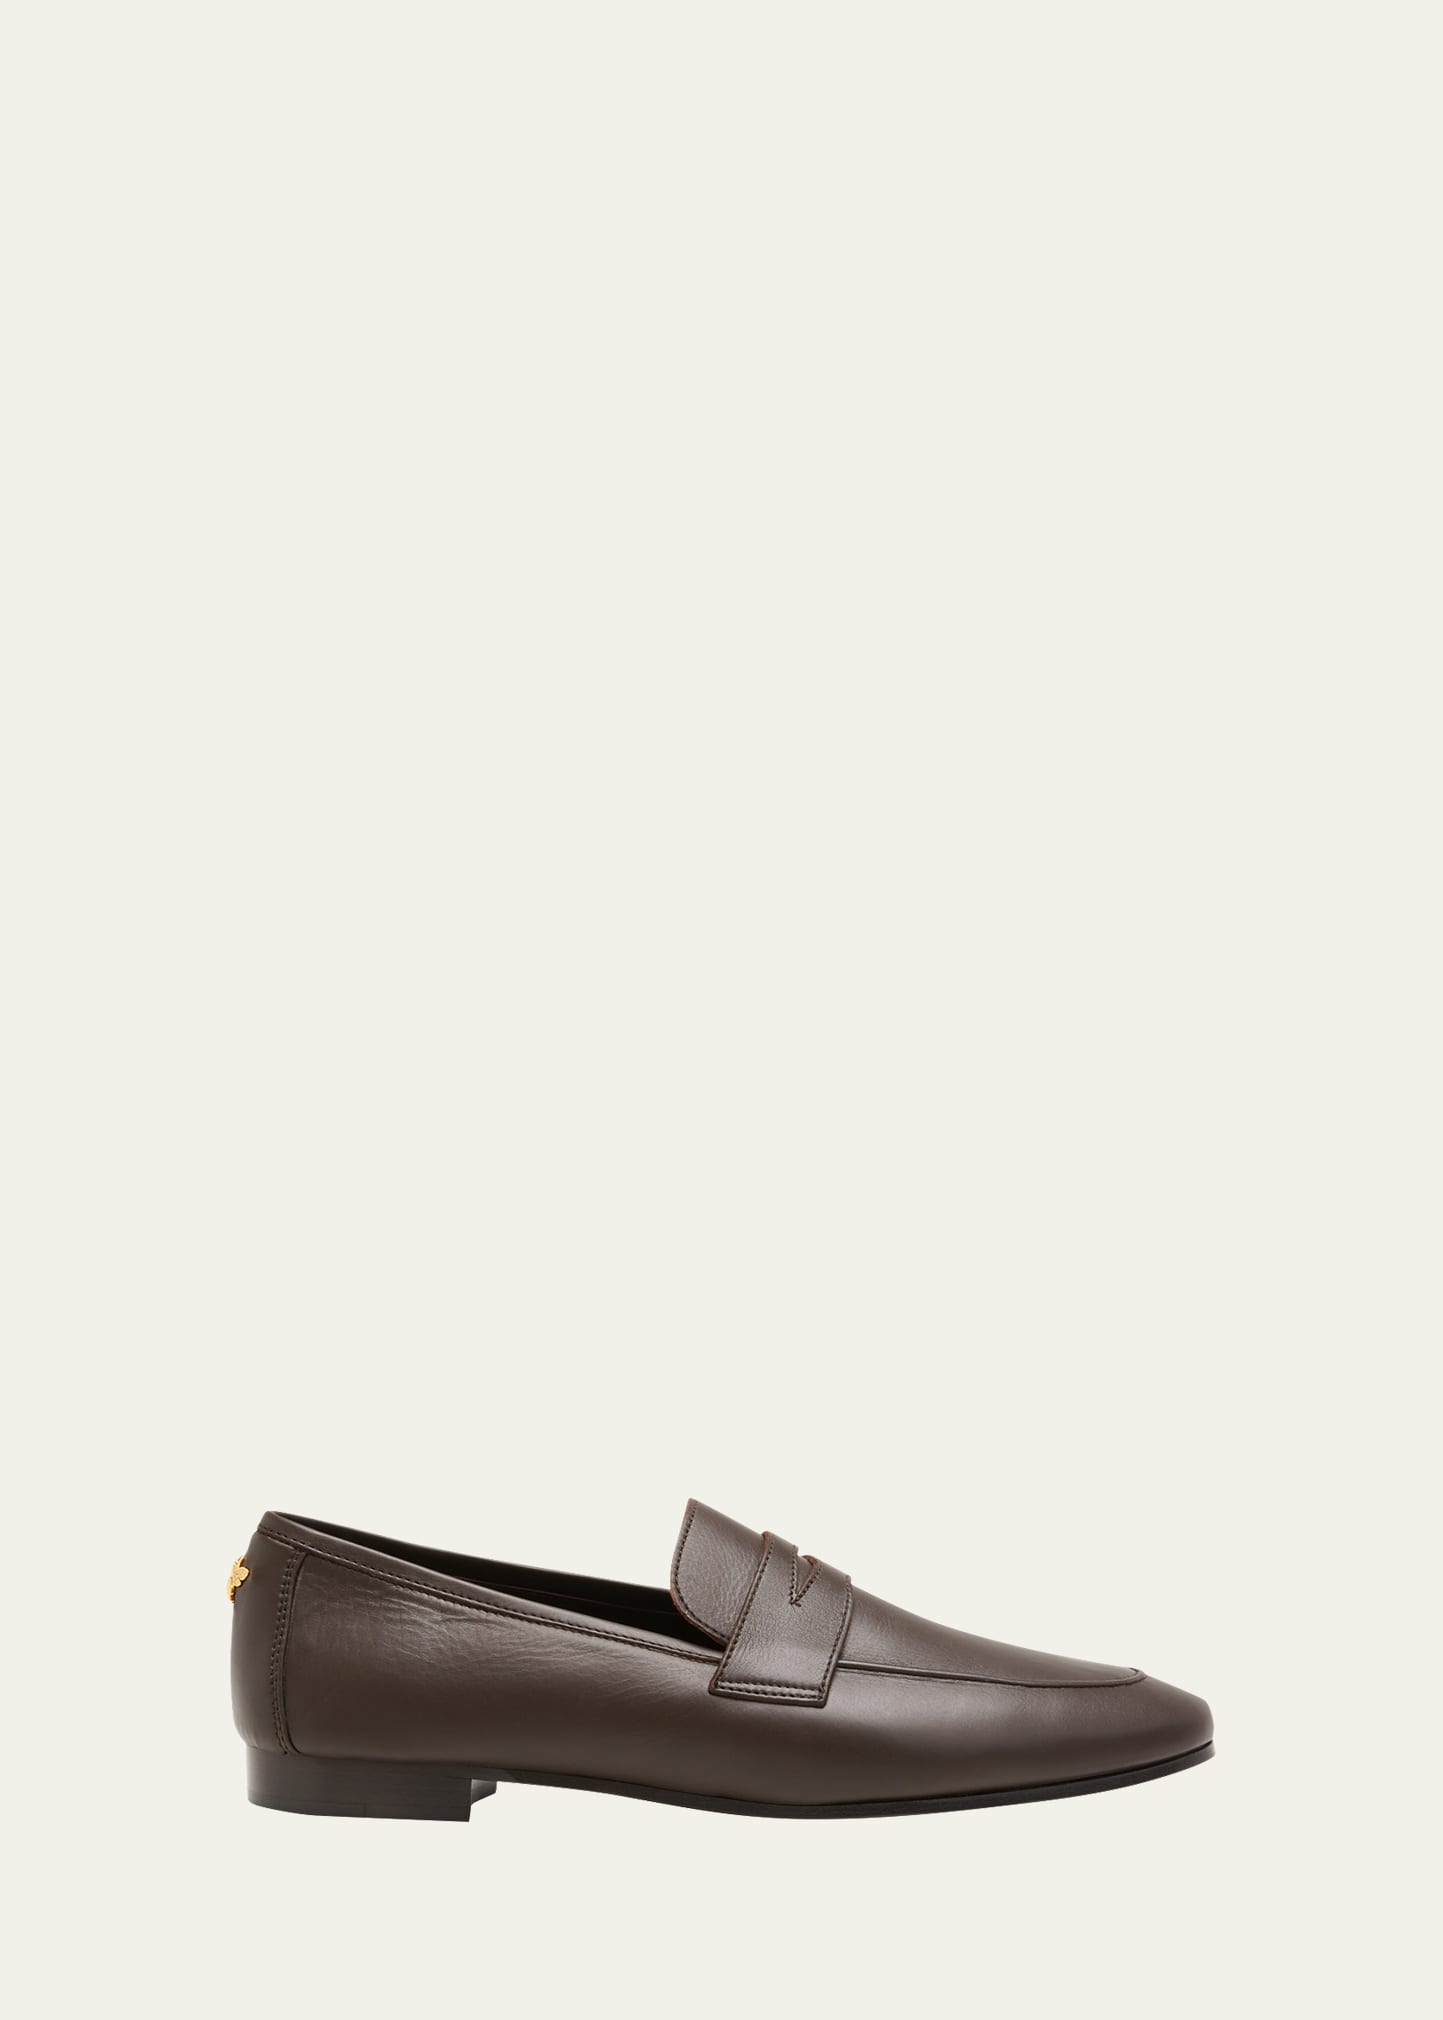 Bougeotte Calf Leather Penny Loafers